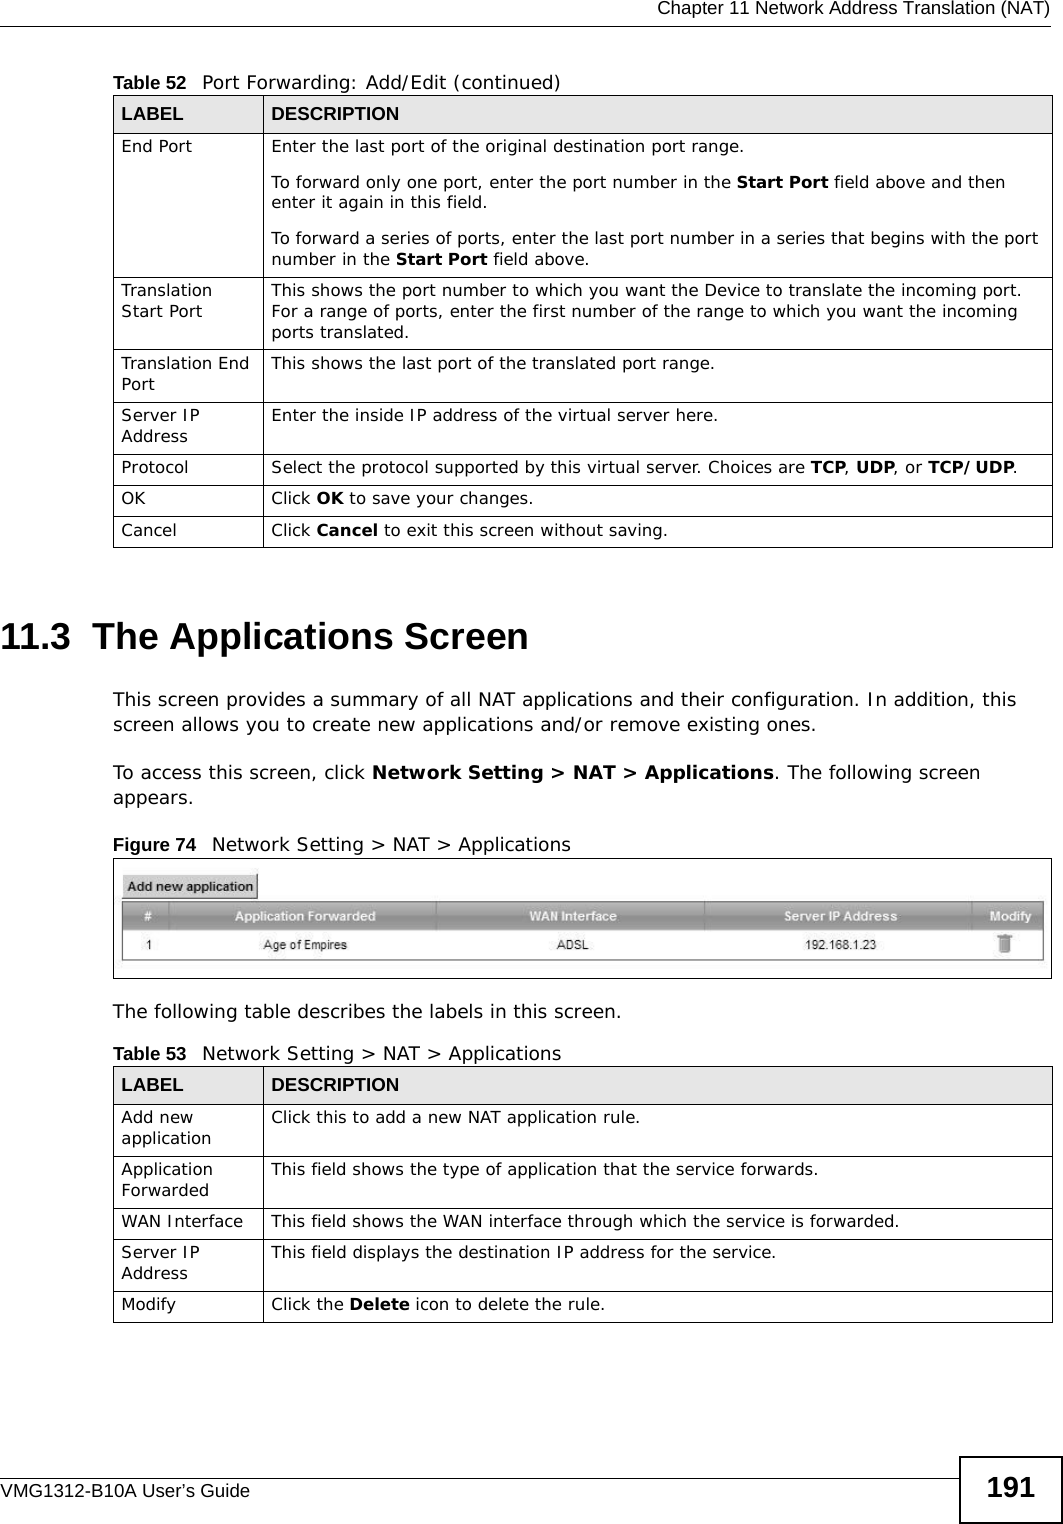  Chapter 11 Network Address Translation (NAT)VMG1312-B10A User’s Guide 19111.3  The Applications ScreenThis screen provides a summary of all NAT applications and their configuration. In addition, this screen allows you to create new applications and/or remove existing ones.To access this screen, click Network Setting &gt; NAT &gt; Applications. The following screen appears.Figure 74   Network Setting &gt; NAT &gt; ApplicationsThe following table describes the labels in this screen. End Port  Enter the last port of the original destination port range. To forward only one port, enter the port number in the Start Port field above and then enter it again in this field. To forward a series of ports, enter the last port number in a series that begins with the port number in the Start Port field above.Translation Start Port This shows the port number to which you want the Device to translate the incoming port. For a range of ports, enter the first number of the range to which you want the incoming ports translated.Translation End Port  This shows the last port of the translated port range.Server IP Address Enter the inside IP address of the virtual server here.Protocol Select the protocol supported by this virtual server. Choices are TCP, UDP, or TCP/UDP.OK Click OK to save your changes.Cancel Click Cancel to exit this screen without saving.Table 52   Port Forwarding: Add/Edit (continued)LABEL DESCRIPTIONTable 53   Network Setting &gt; NAT &gt; ApplicationsLABEL DESCRIPTIONAdd new application Click this to add a new NAT application rule.Application Forwarded This field shows the type of application that the service forwards.WAN Interface This field shows the WAN interface through which the service is forwarded.Server IP Address This field displays the destination IP address for the service.Modify Click the Delete icon to delete the rule.